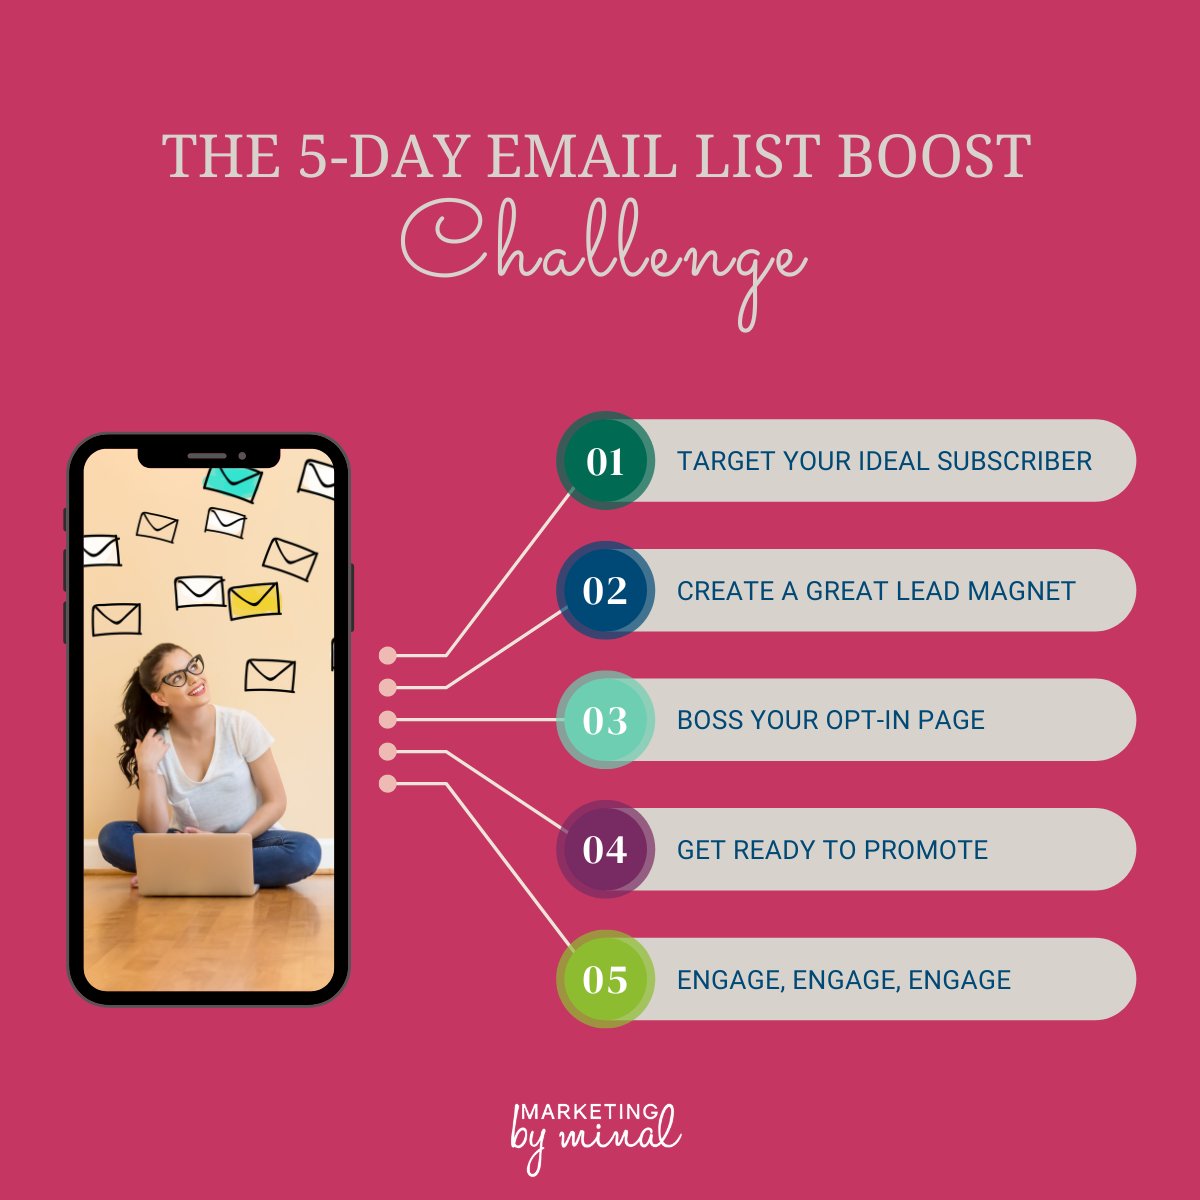 Want to build your email list? Sign up for Marketing by Minal’s 5-Day Email List Boost Challenge. Over the 5 days, you’ll learn how to grow a relevant, organic list full of contacts perfect for your business. Sign up to secure your place! bit.ly/49uhlYV @Minal2804